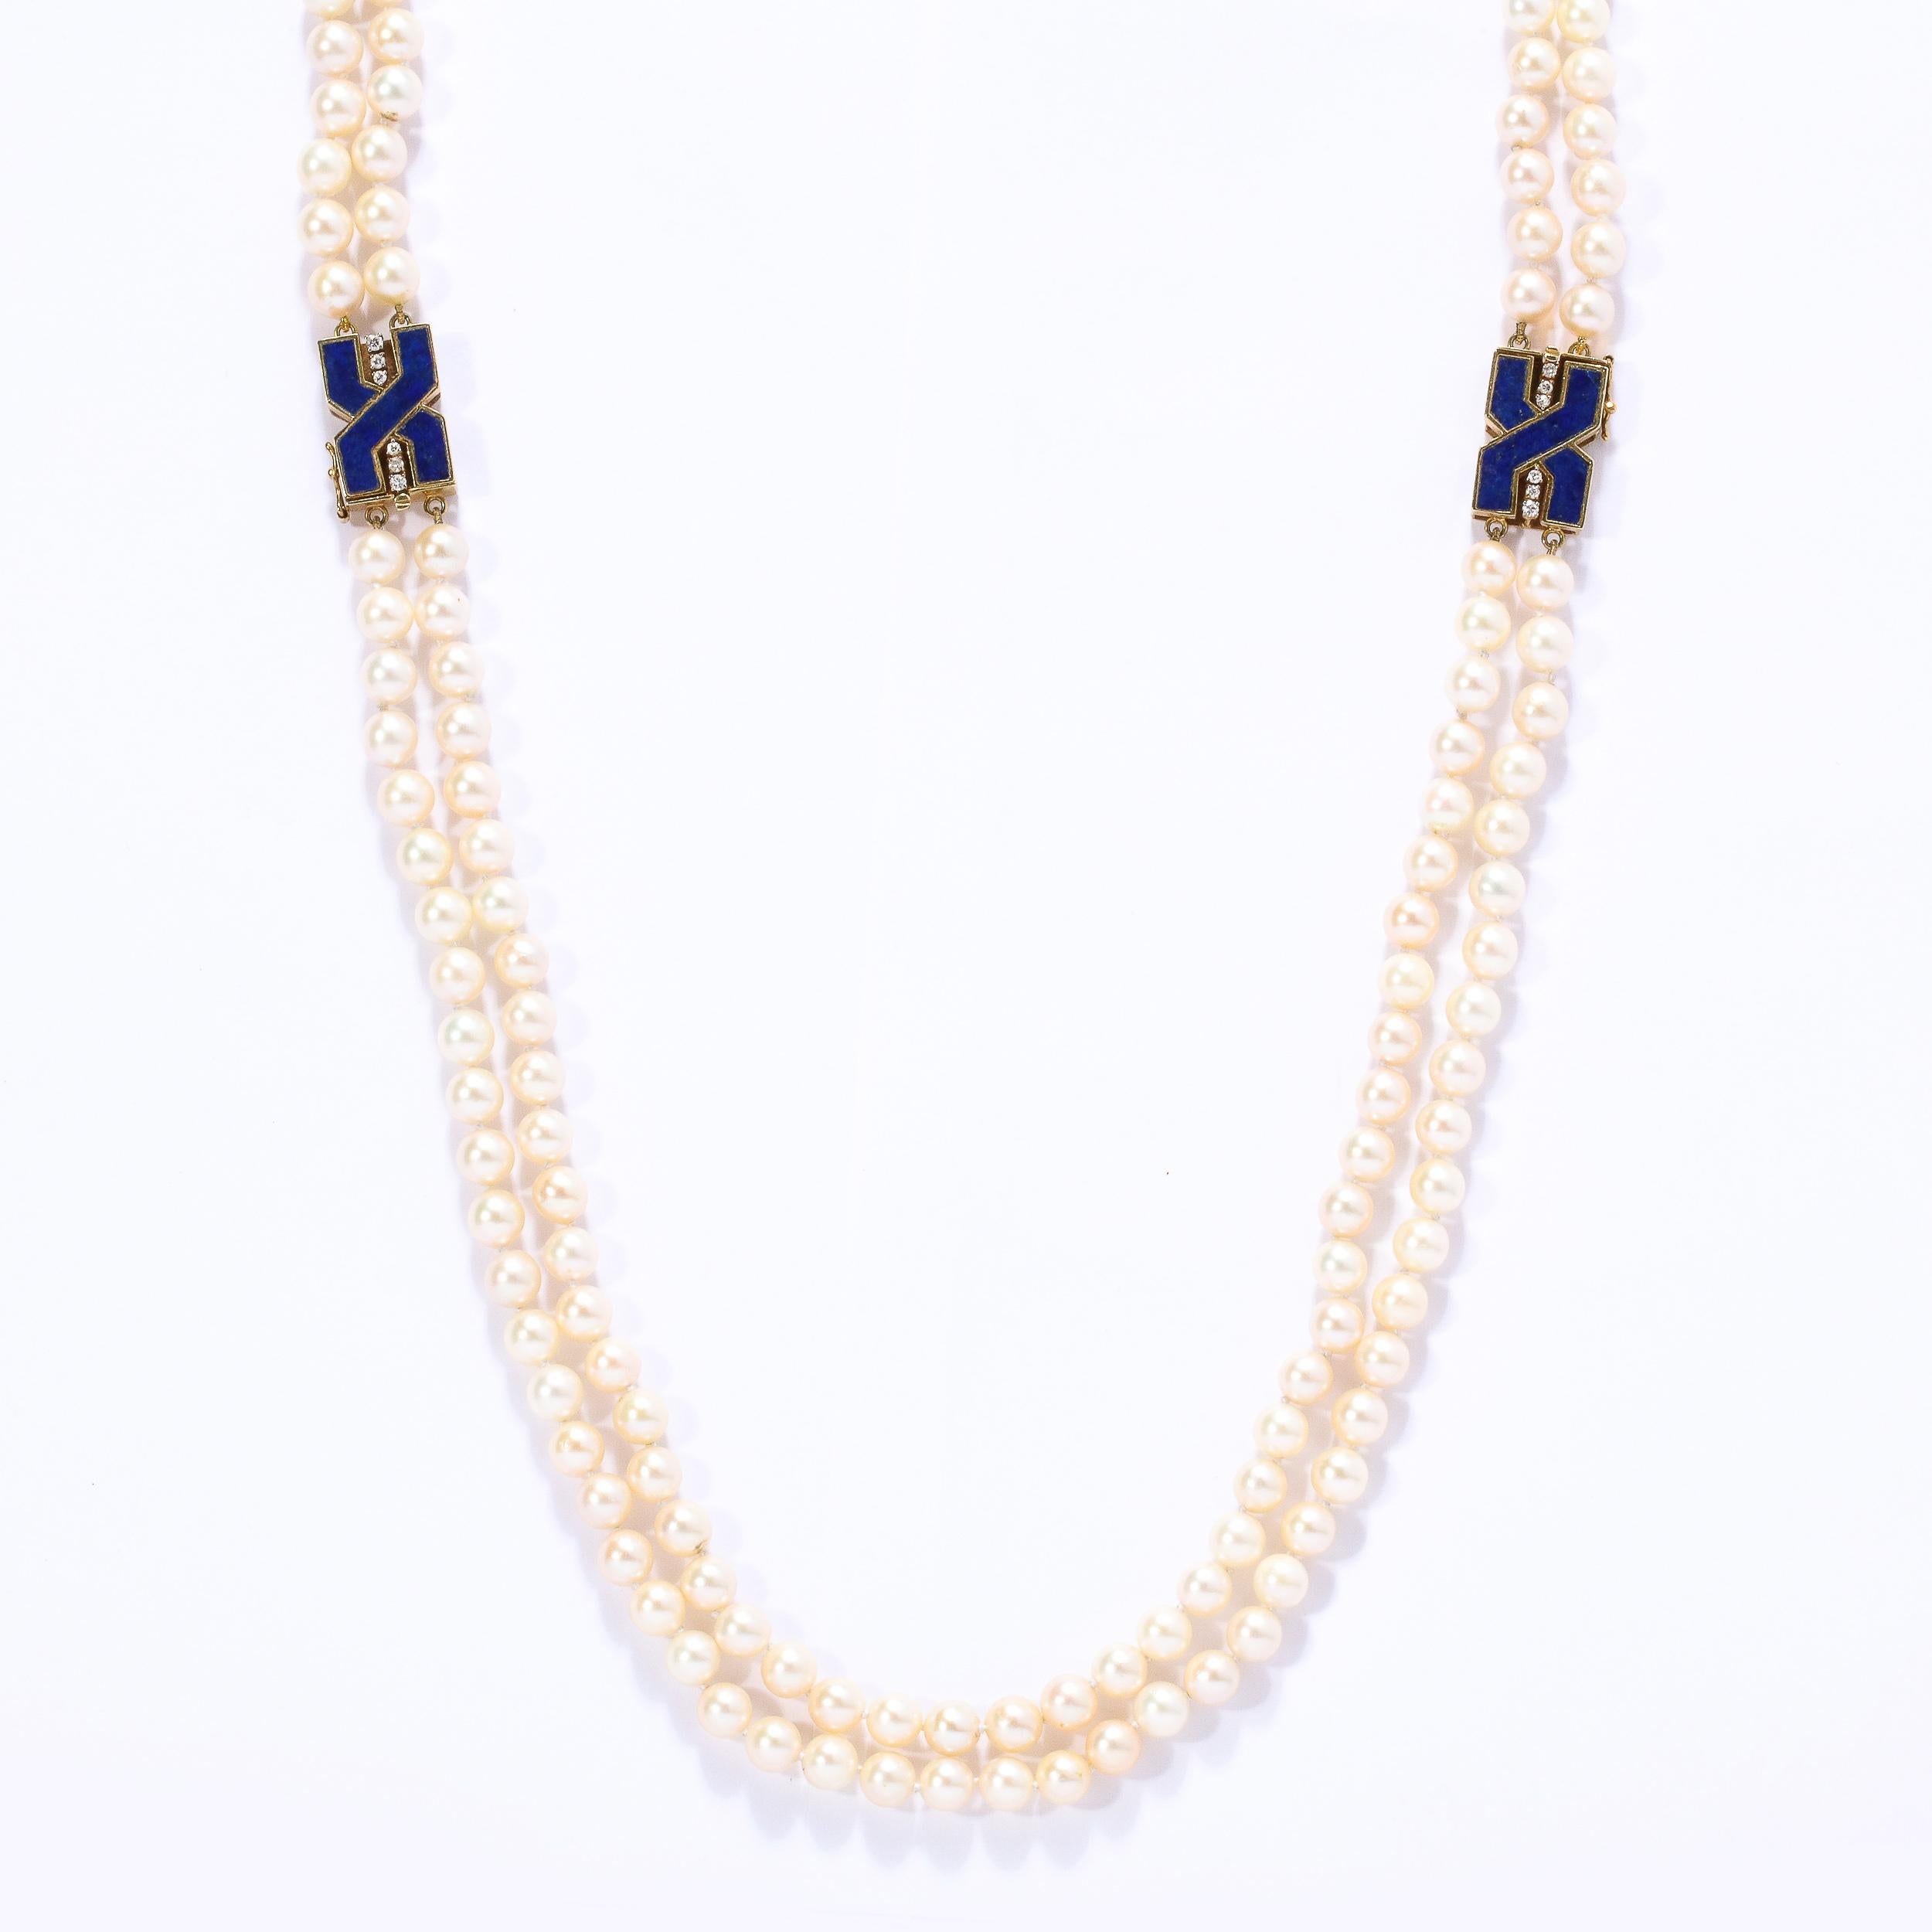 Modernist Bold Double Stand Pearl Necklace with Lapis, Gold and Diamond Clasps In Excellent Condition For Sale In New York, NY